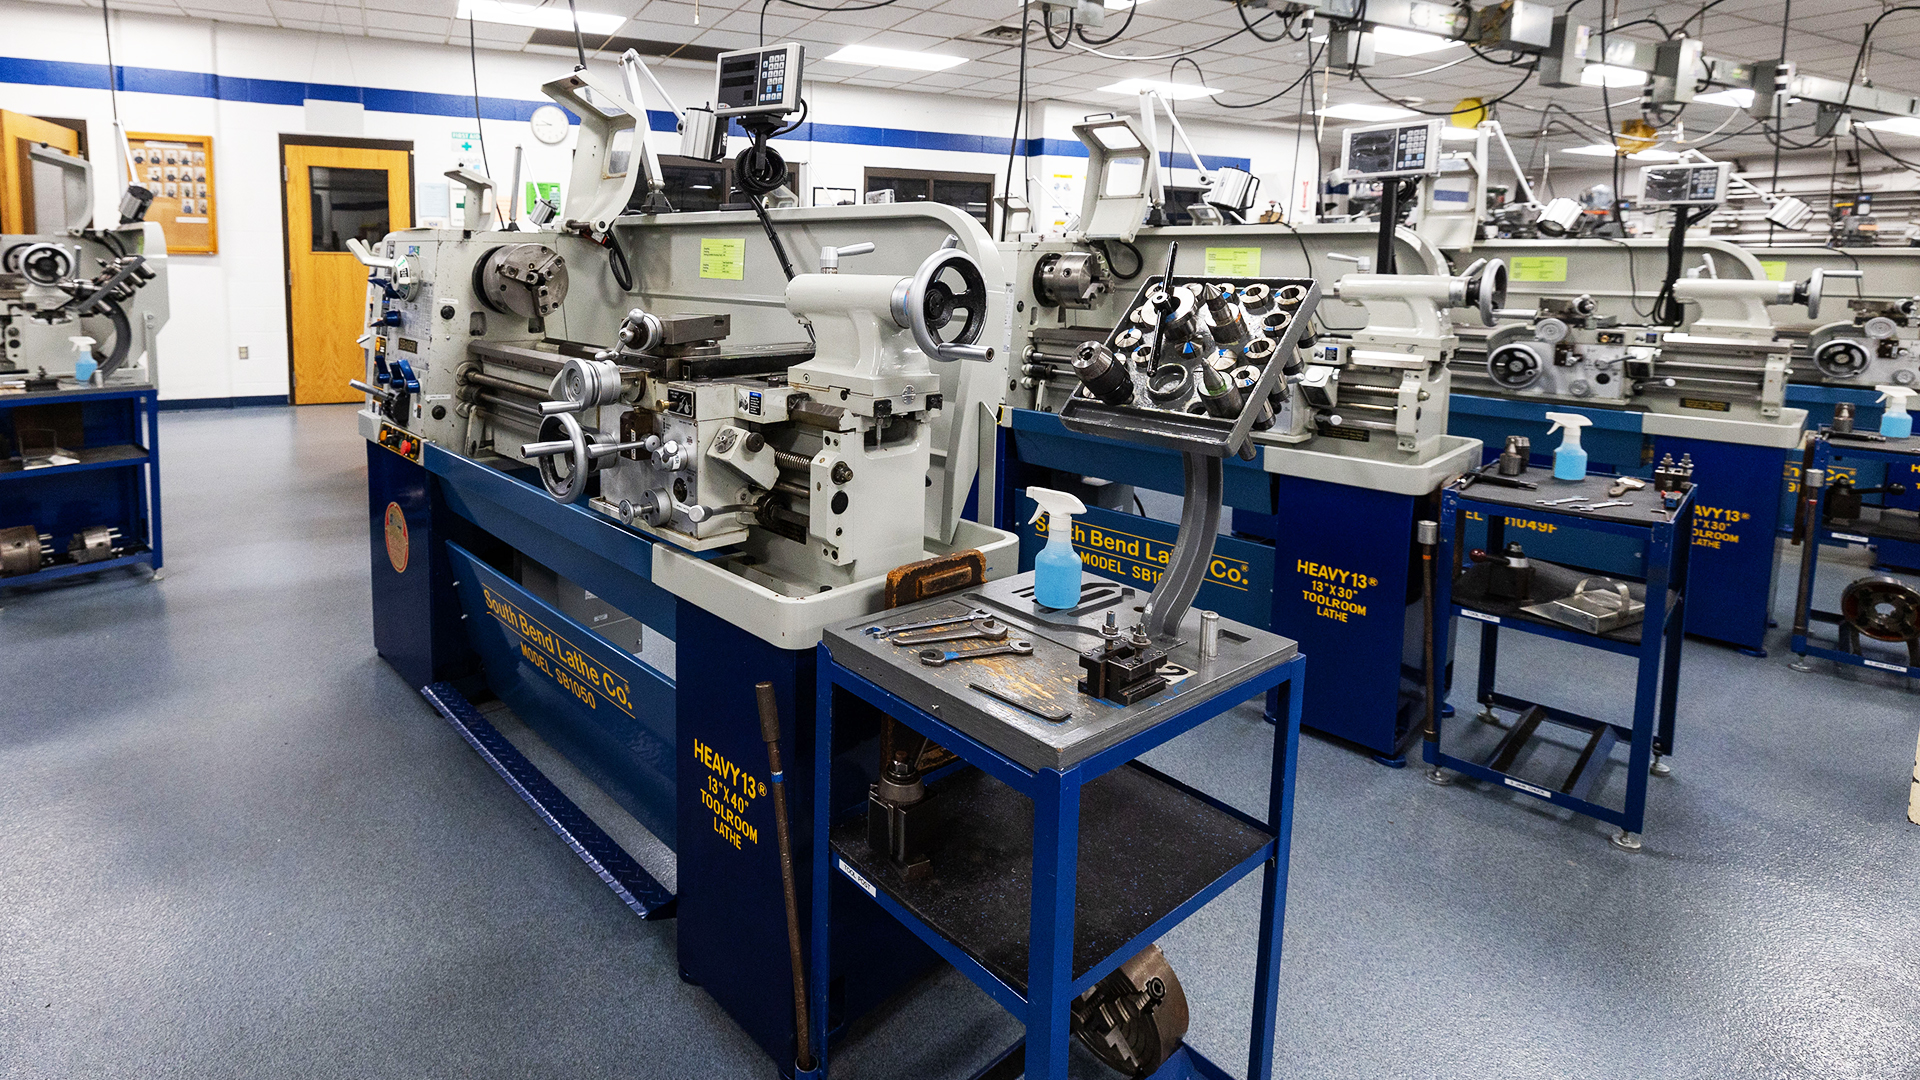 Gearhead Lathes in the Metal Forming and Finishing Lab at UW-Stout